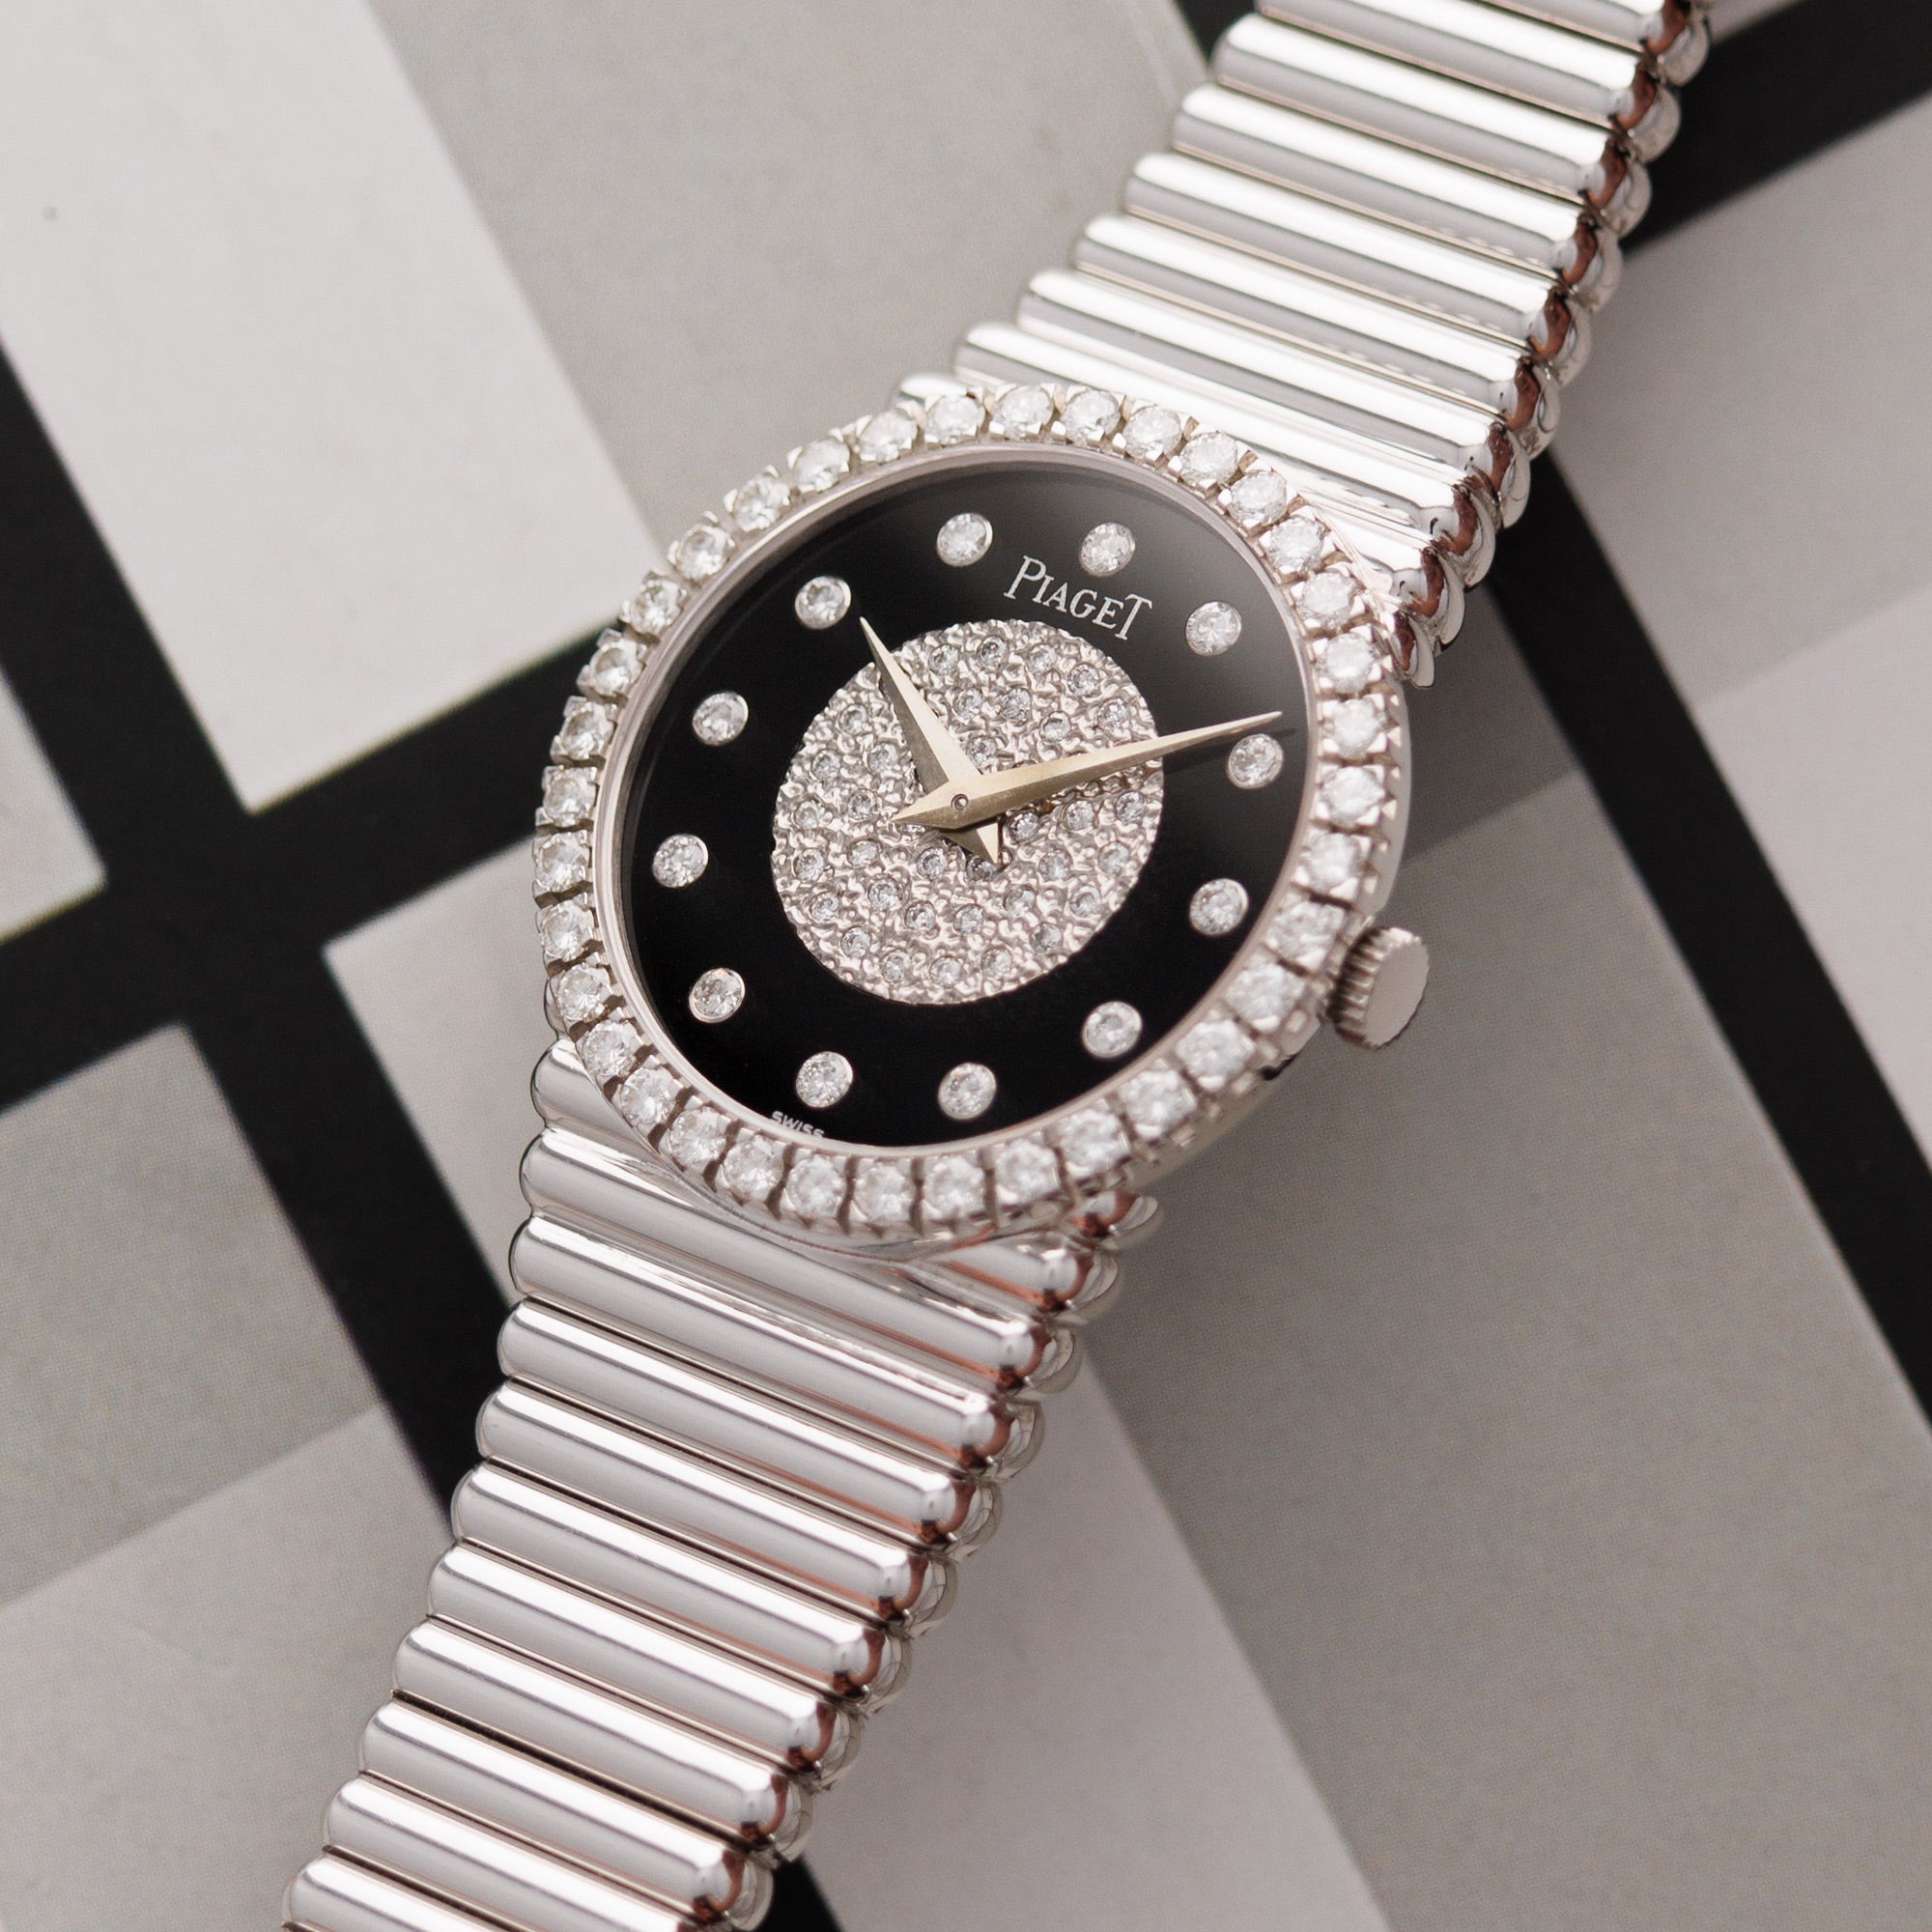 Piaget - Piaget White Gold, Onyx and Diamond Watch Ref. 9706510 - The Keystone Watches